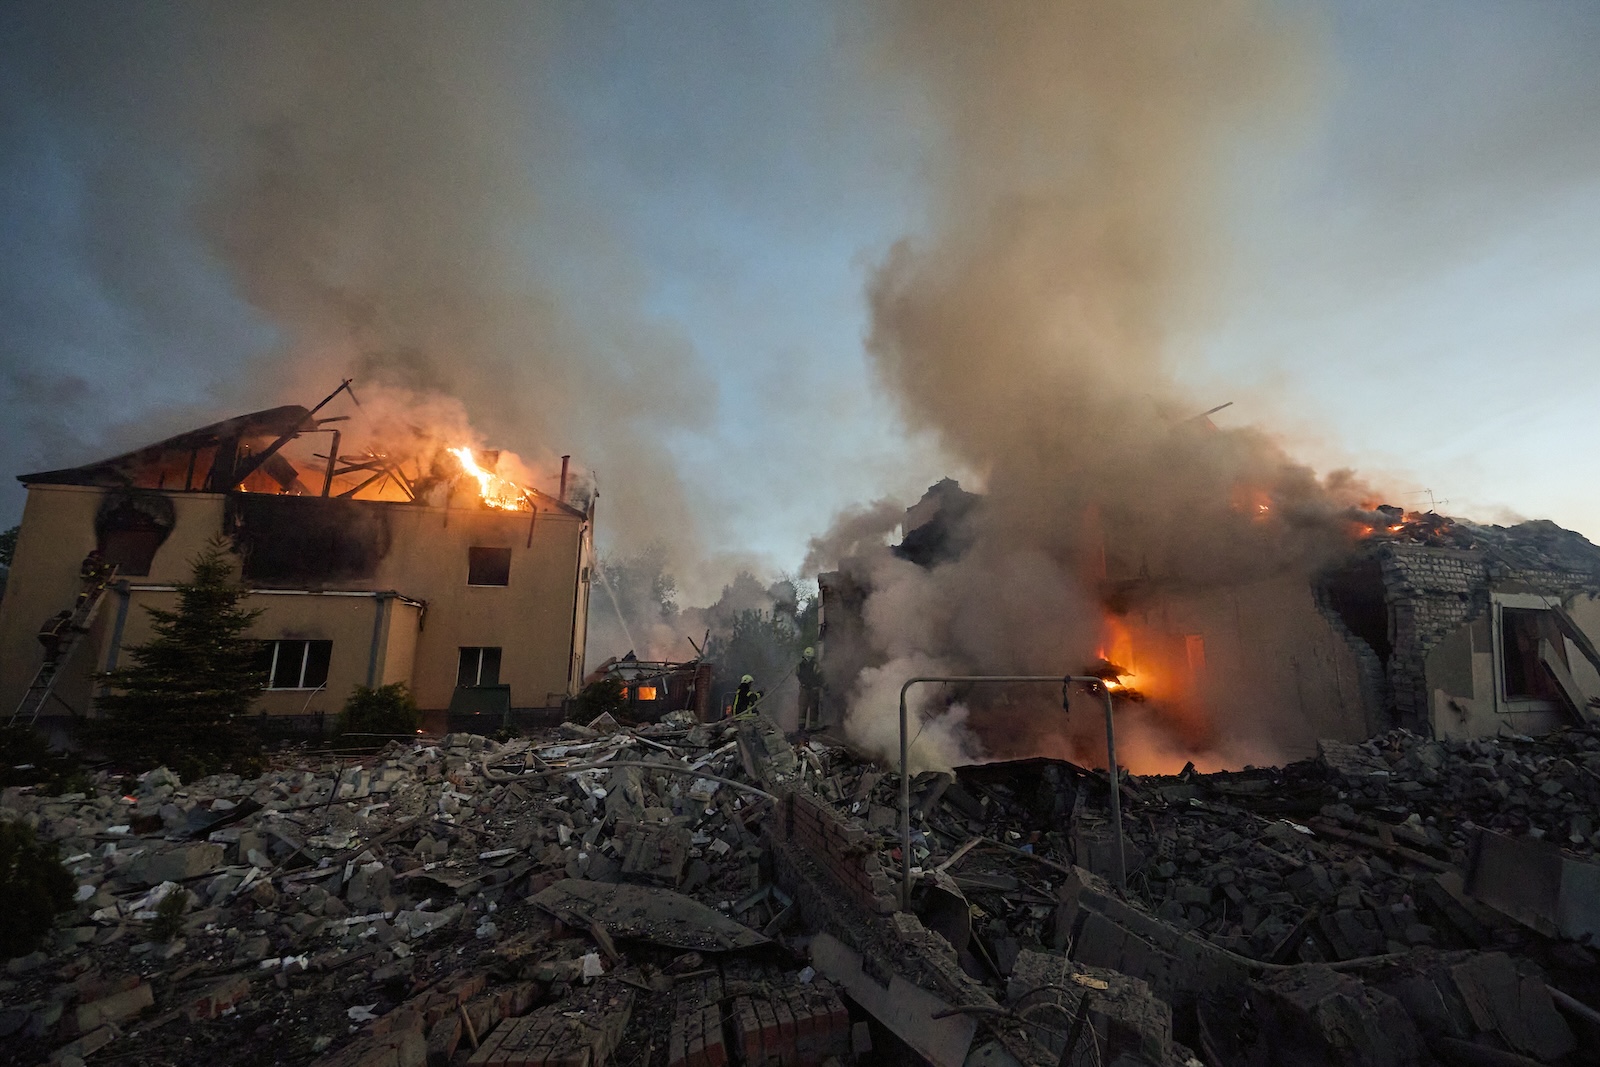 epa11330779 Ukrainian rescuers work to extinguish a fire at the site of an overnight missile strike on private buildings in Kharkiv, northeastern Ukraine, 10 May 2024, amid the Russian invasion. Kharkiv was hit by an S-300 missile at night, Mayor Ihor Terekhov wrote on telegram. At least two people, a 11-year-old child and a 72-year-old woman, were injured in the attack, according to the head of the Kharkiv Regional Military Administration, Oleg Synegubov. Russian troops entered Ukrainian territory on 24 February 2022, starting a conflict that has provoked destruction and a humanitarian crisis.  EPA/SERGEY KOZLOV